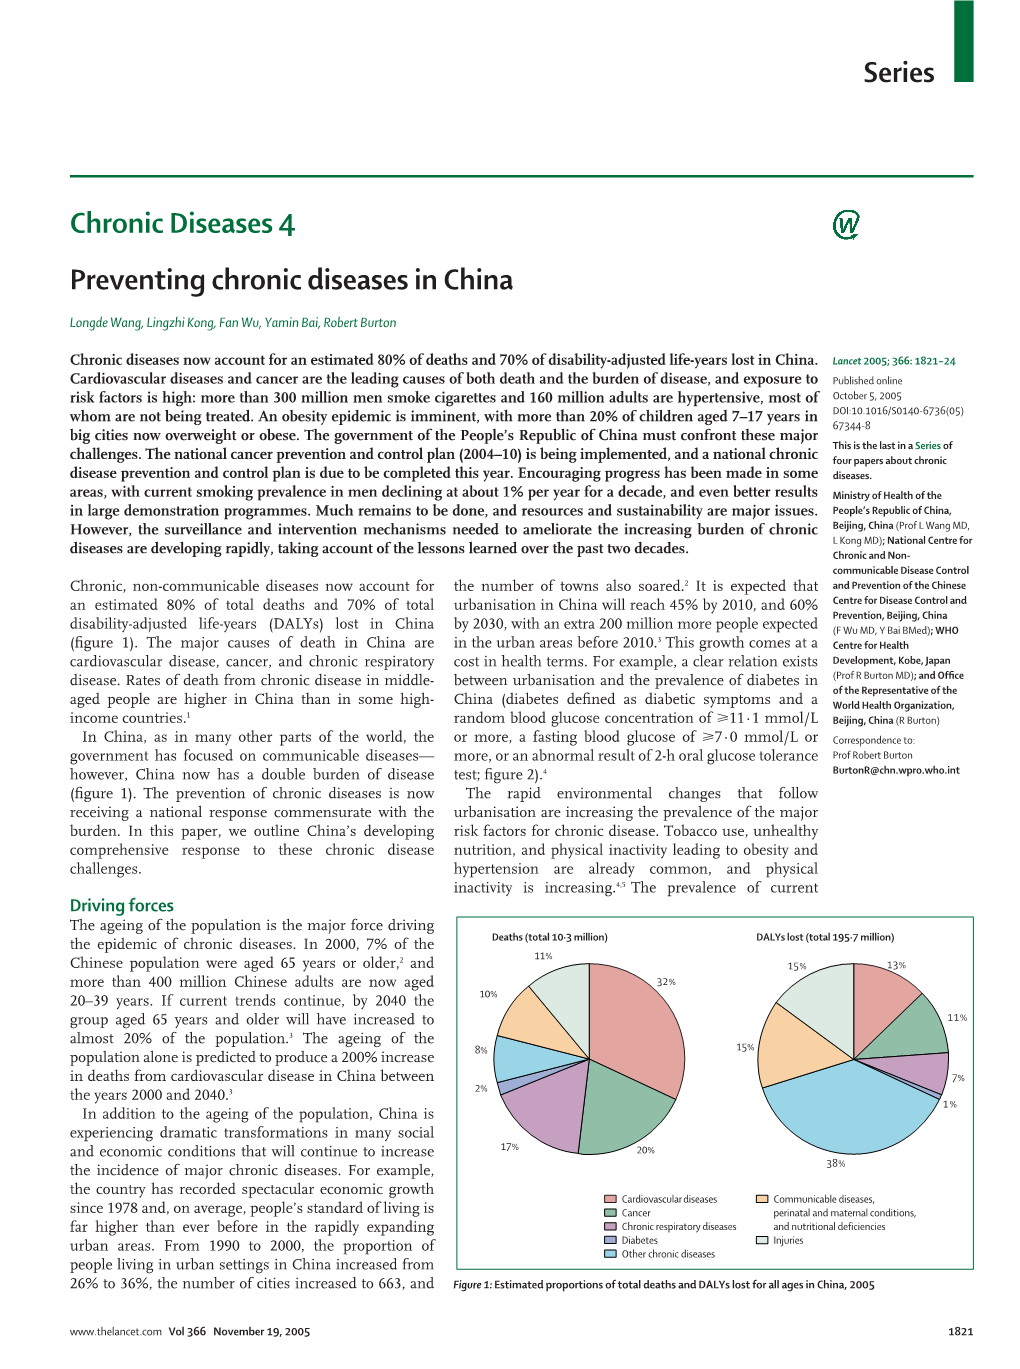 Preventing Chronic Diseases in China